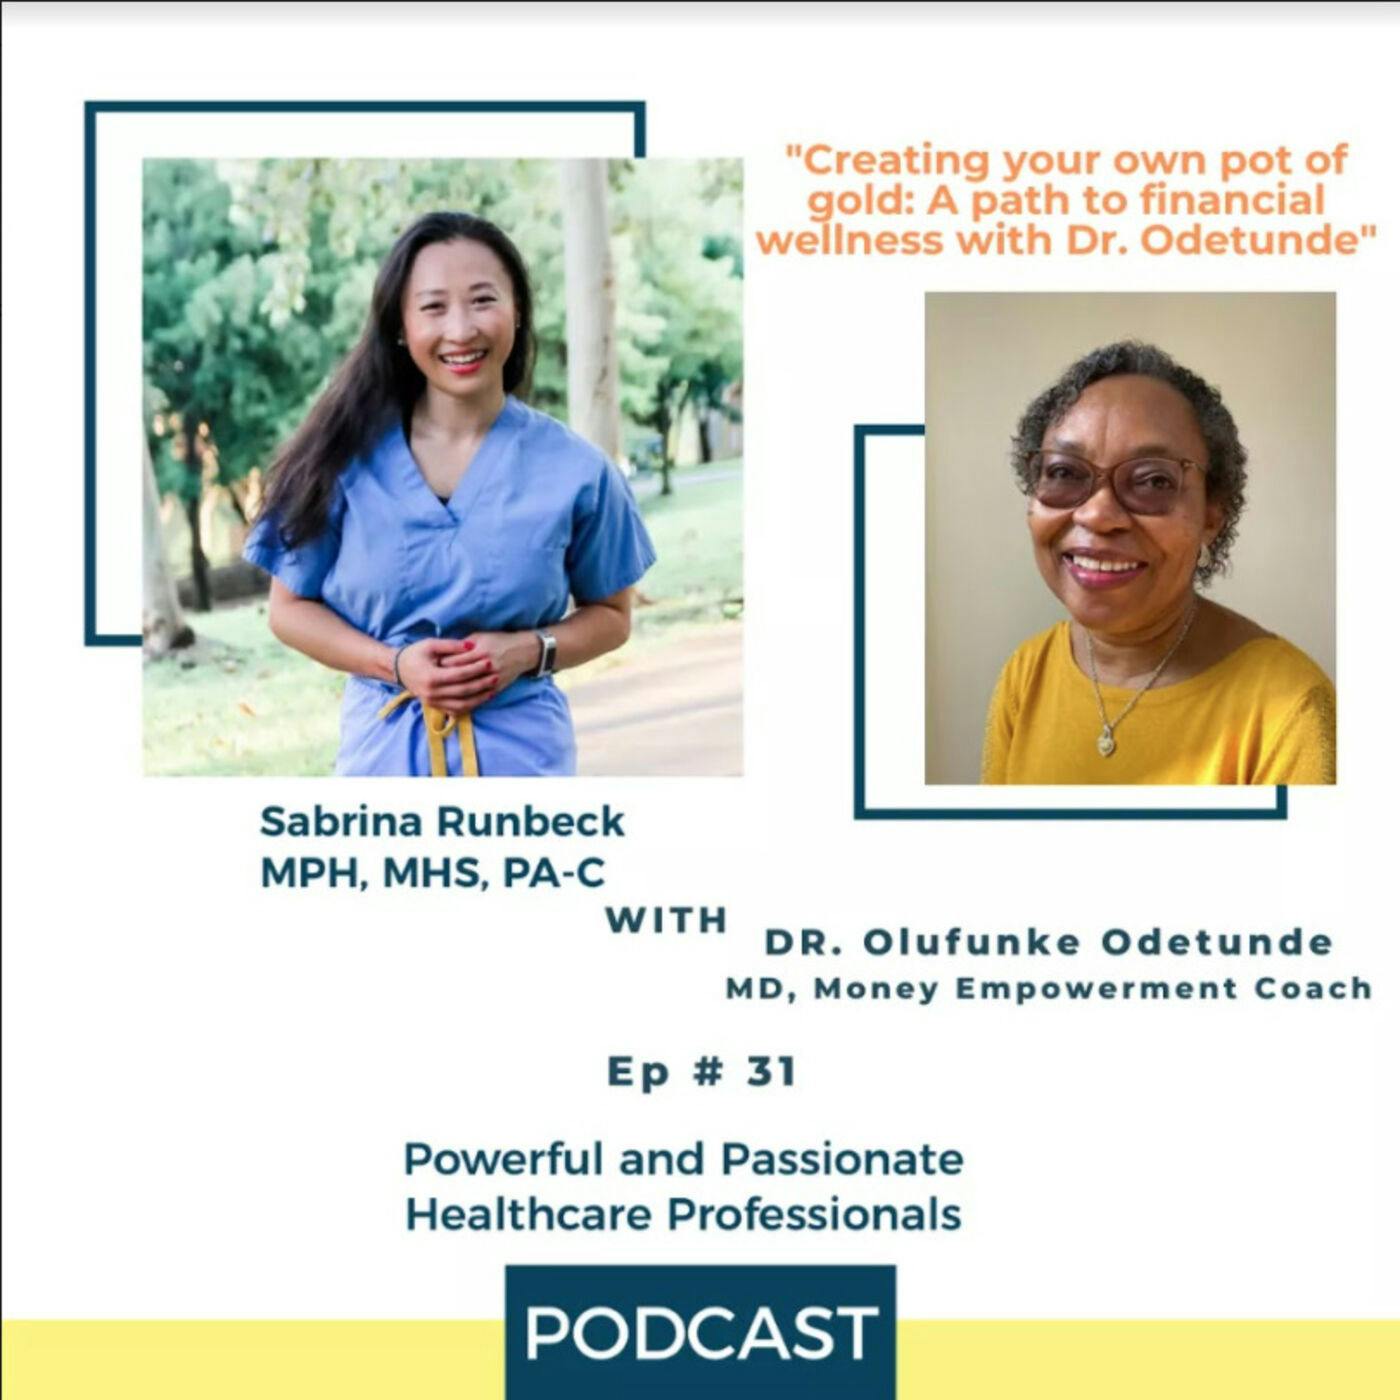 Ep 31 – Creating your own pot of gold: A path to financial wellness with Dr. Olufunke Odetunde